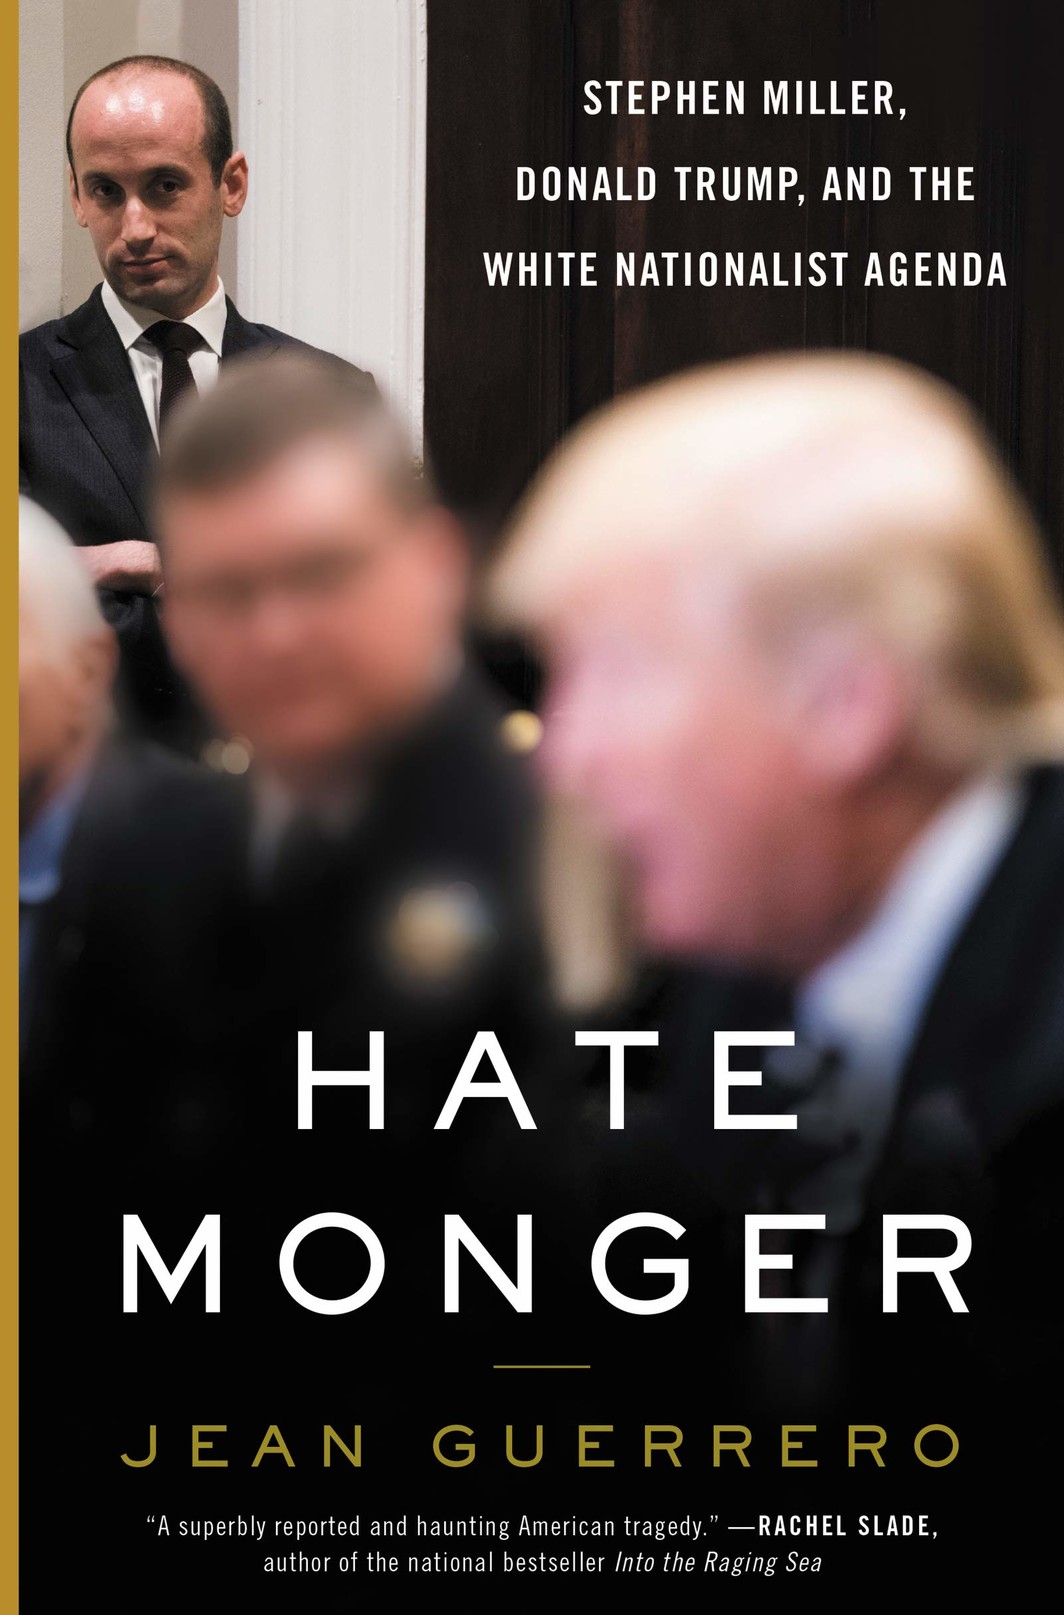 The cover of Hatemonger: Stephen Miller, Donald Trump, and the White Nationalist Agenda